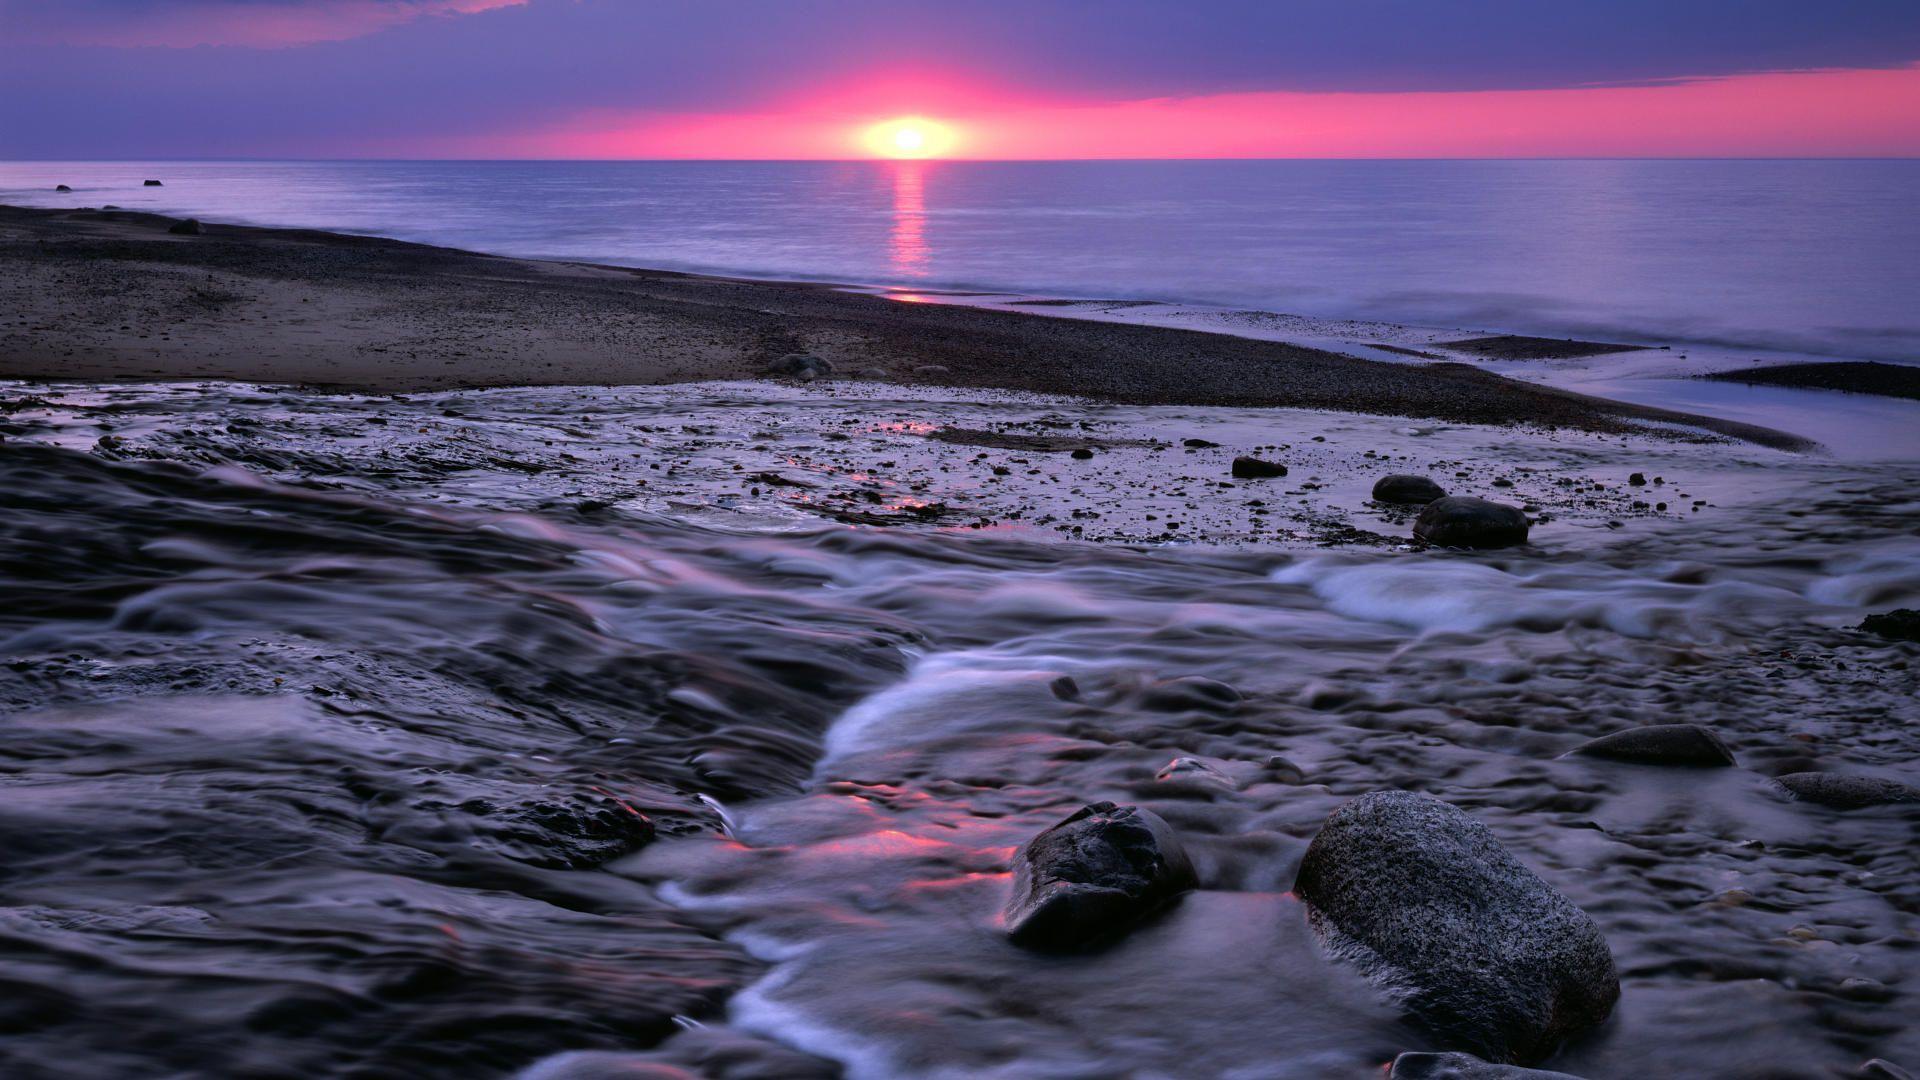 Lake Superior Wallpaper. Daily inspiration art photo, picture